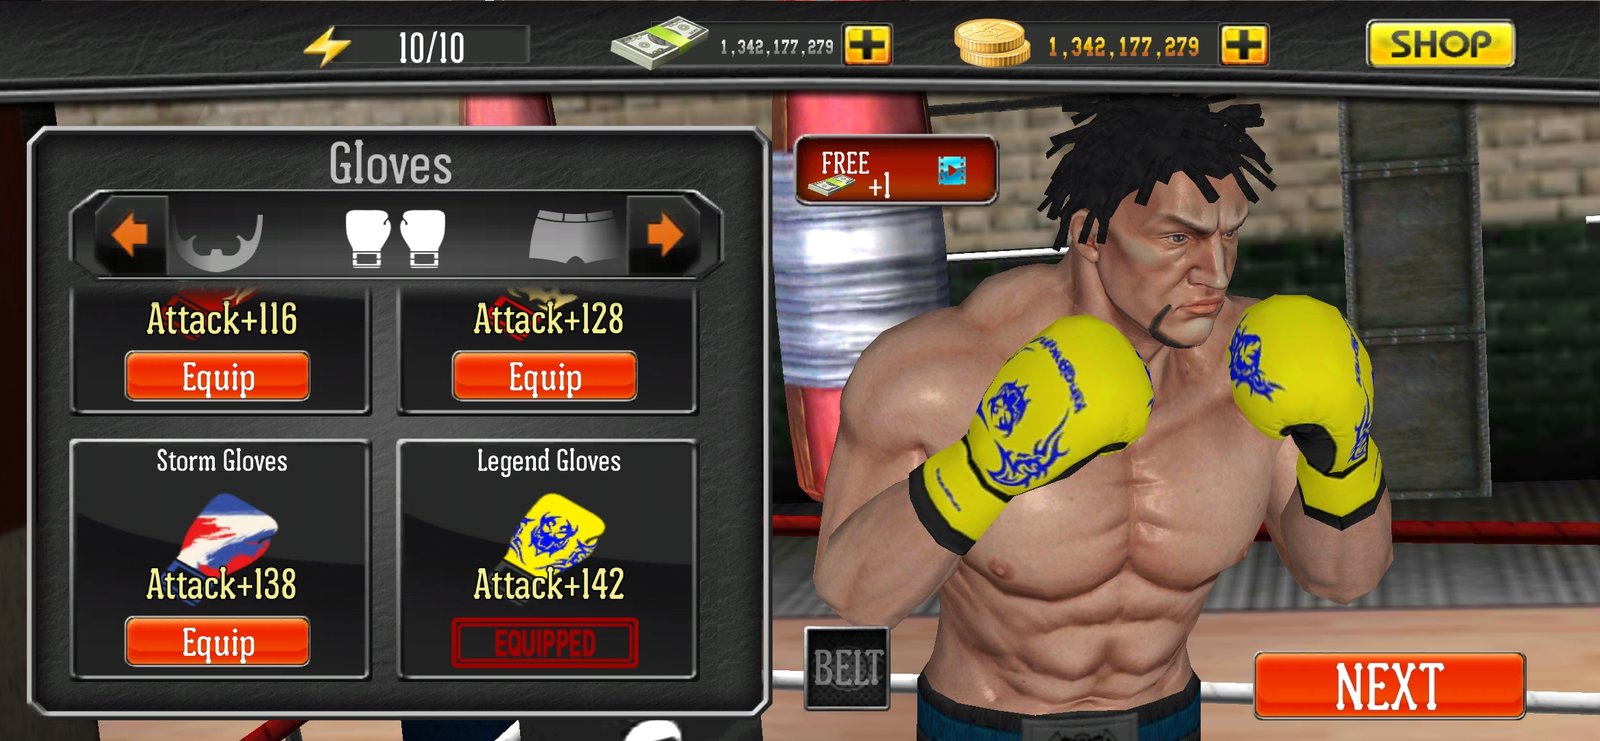 Punch Boxing 3D - Apps on Google Play